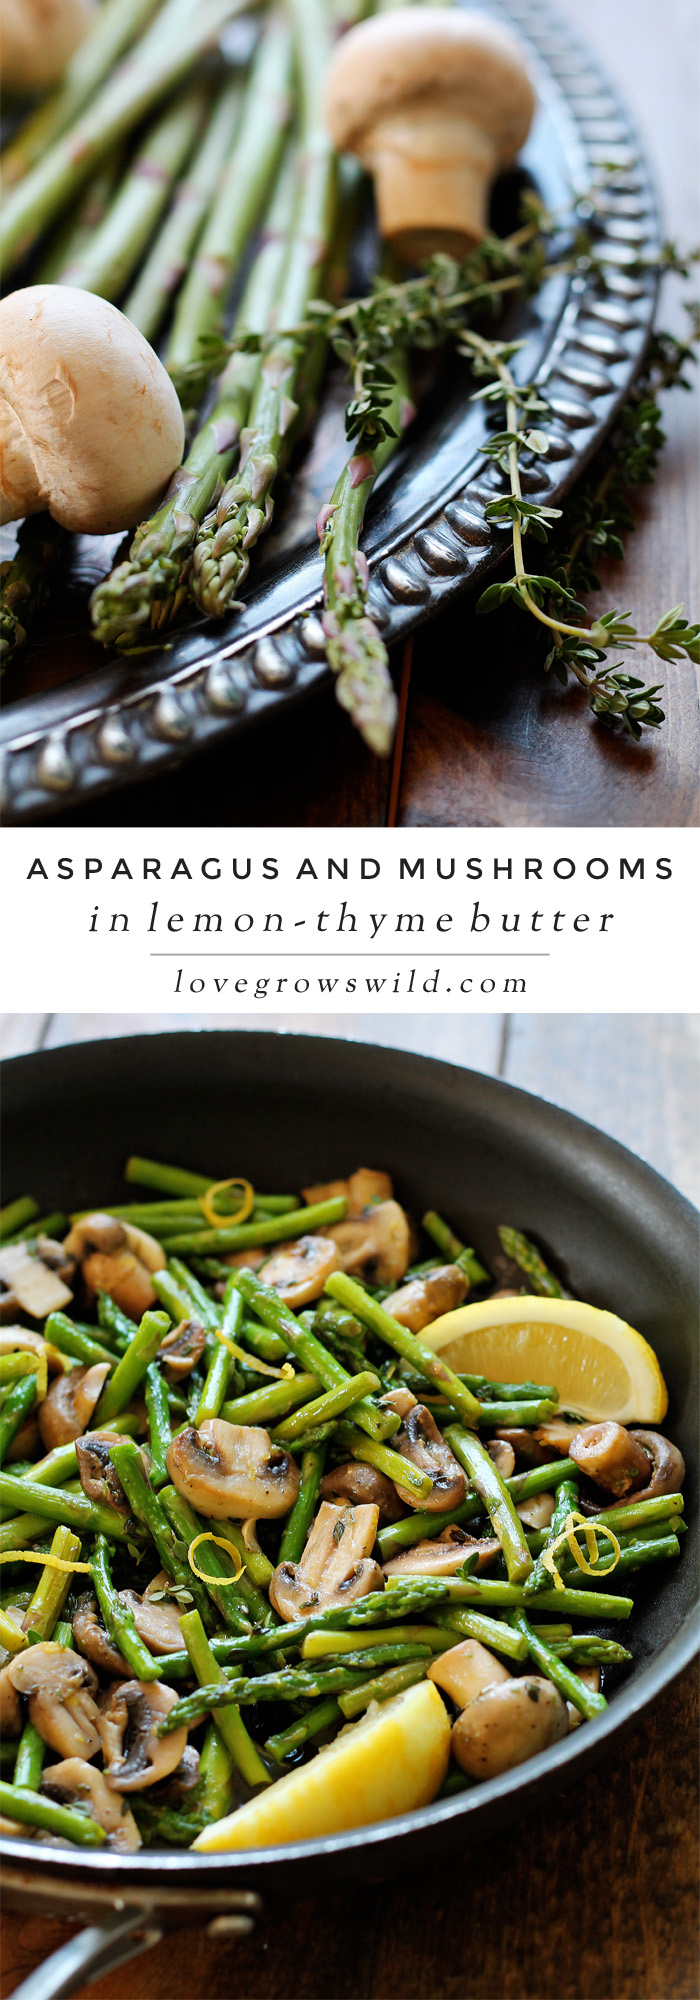 Asparagus and mushrooms lightly sautéed in butter and flavored with lemon zest and fresh thyme. A delicious and healthy side dish that pairs well with just about any meal! Get the recipe at LoveGrowsWild.com